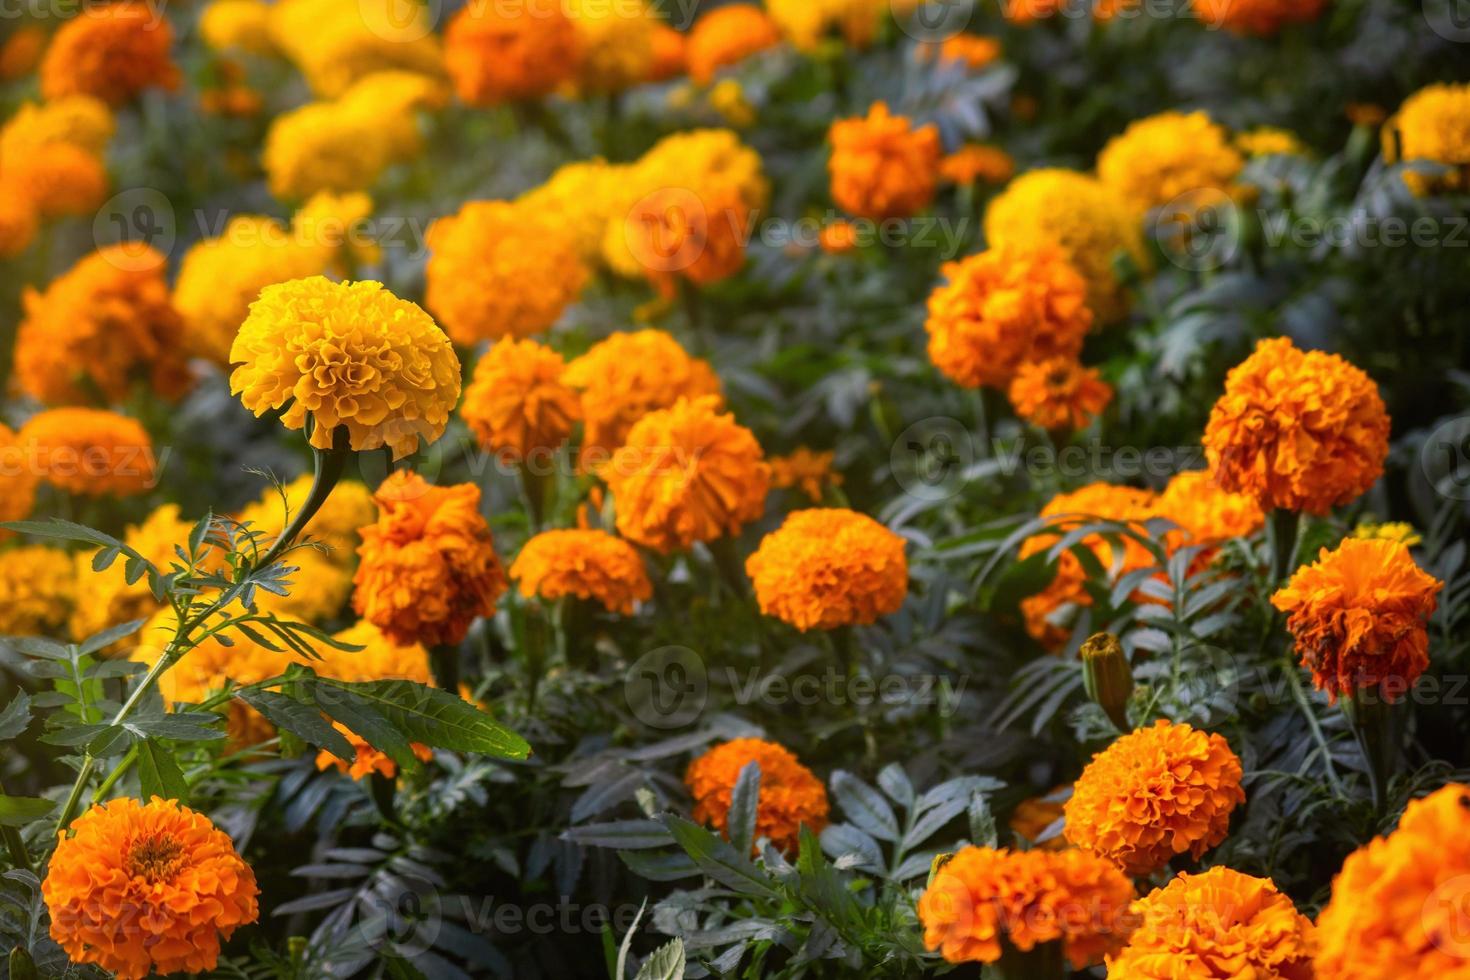 Background texture for day of the dead in mexico with cempasuchil flowers  Damasquina Tagetes erecta 13764400 Stock Photo at Vecteezy